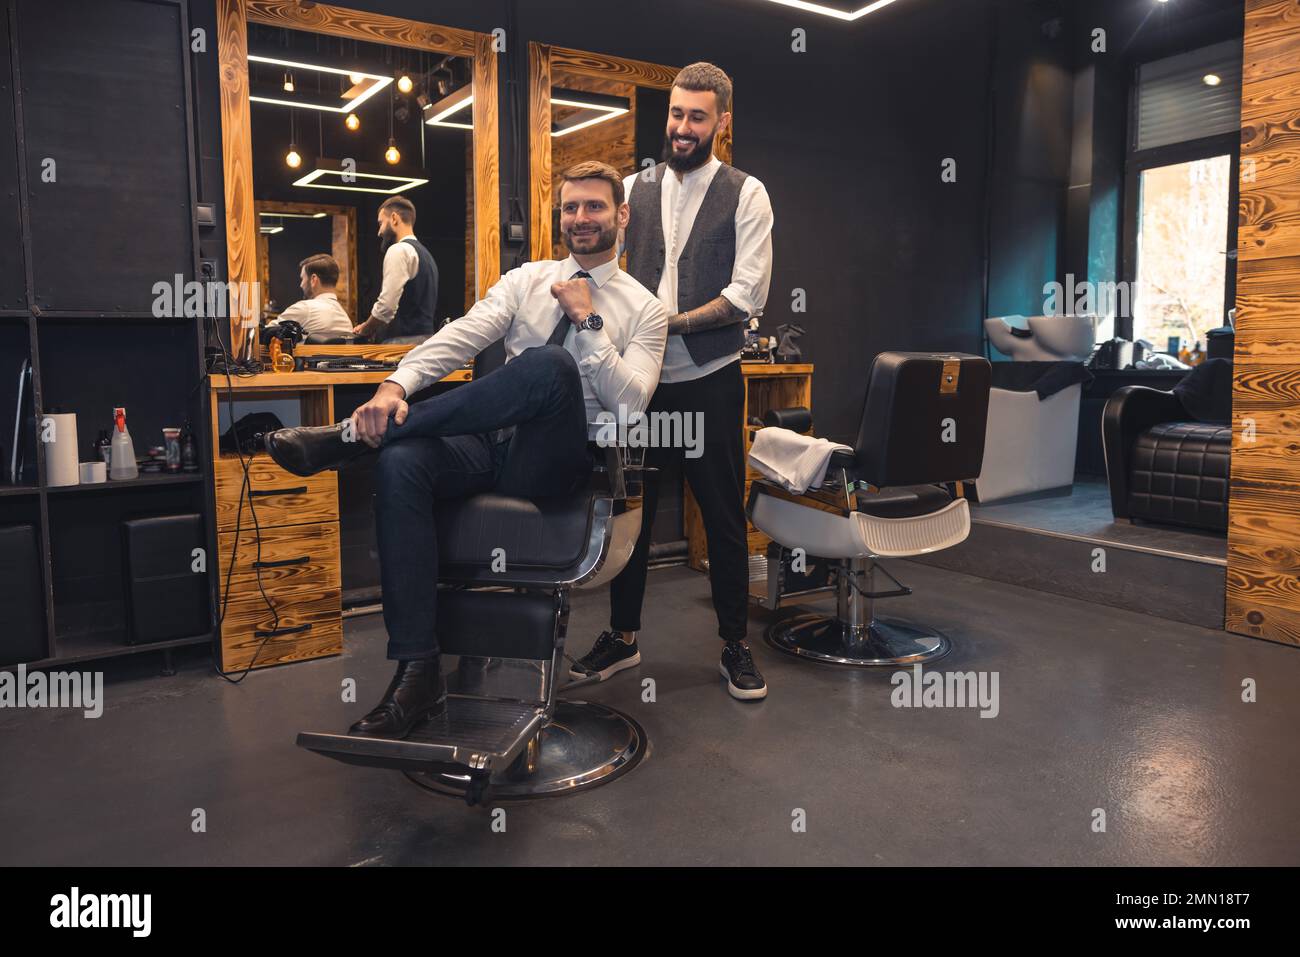 Elegant client sitting in a chiar in the barbershop Stock Photo